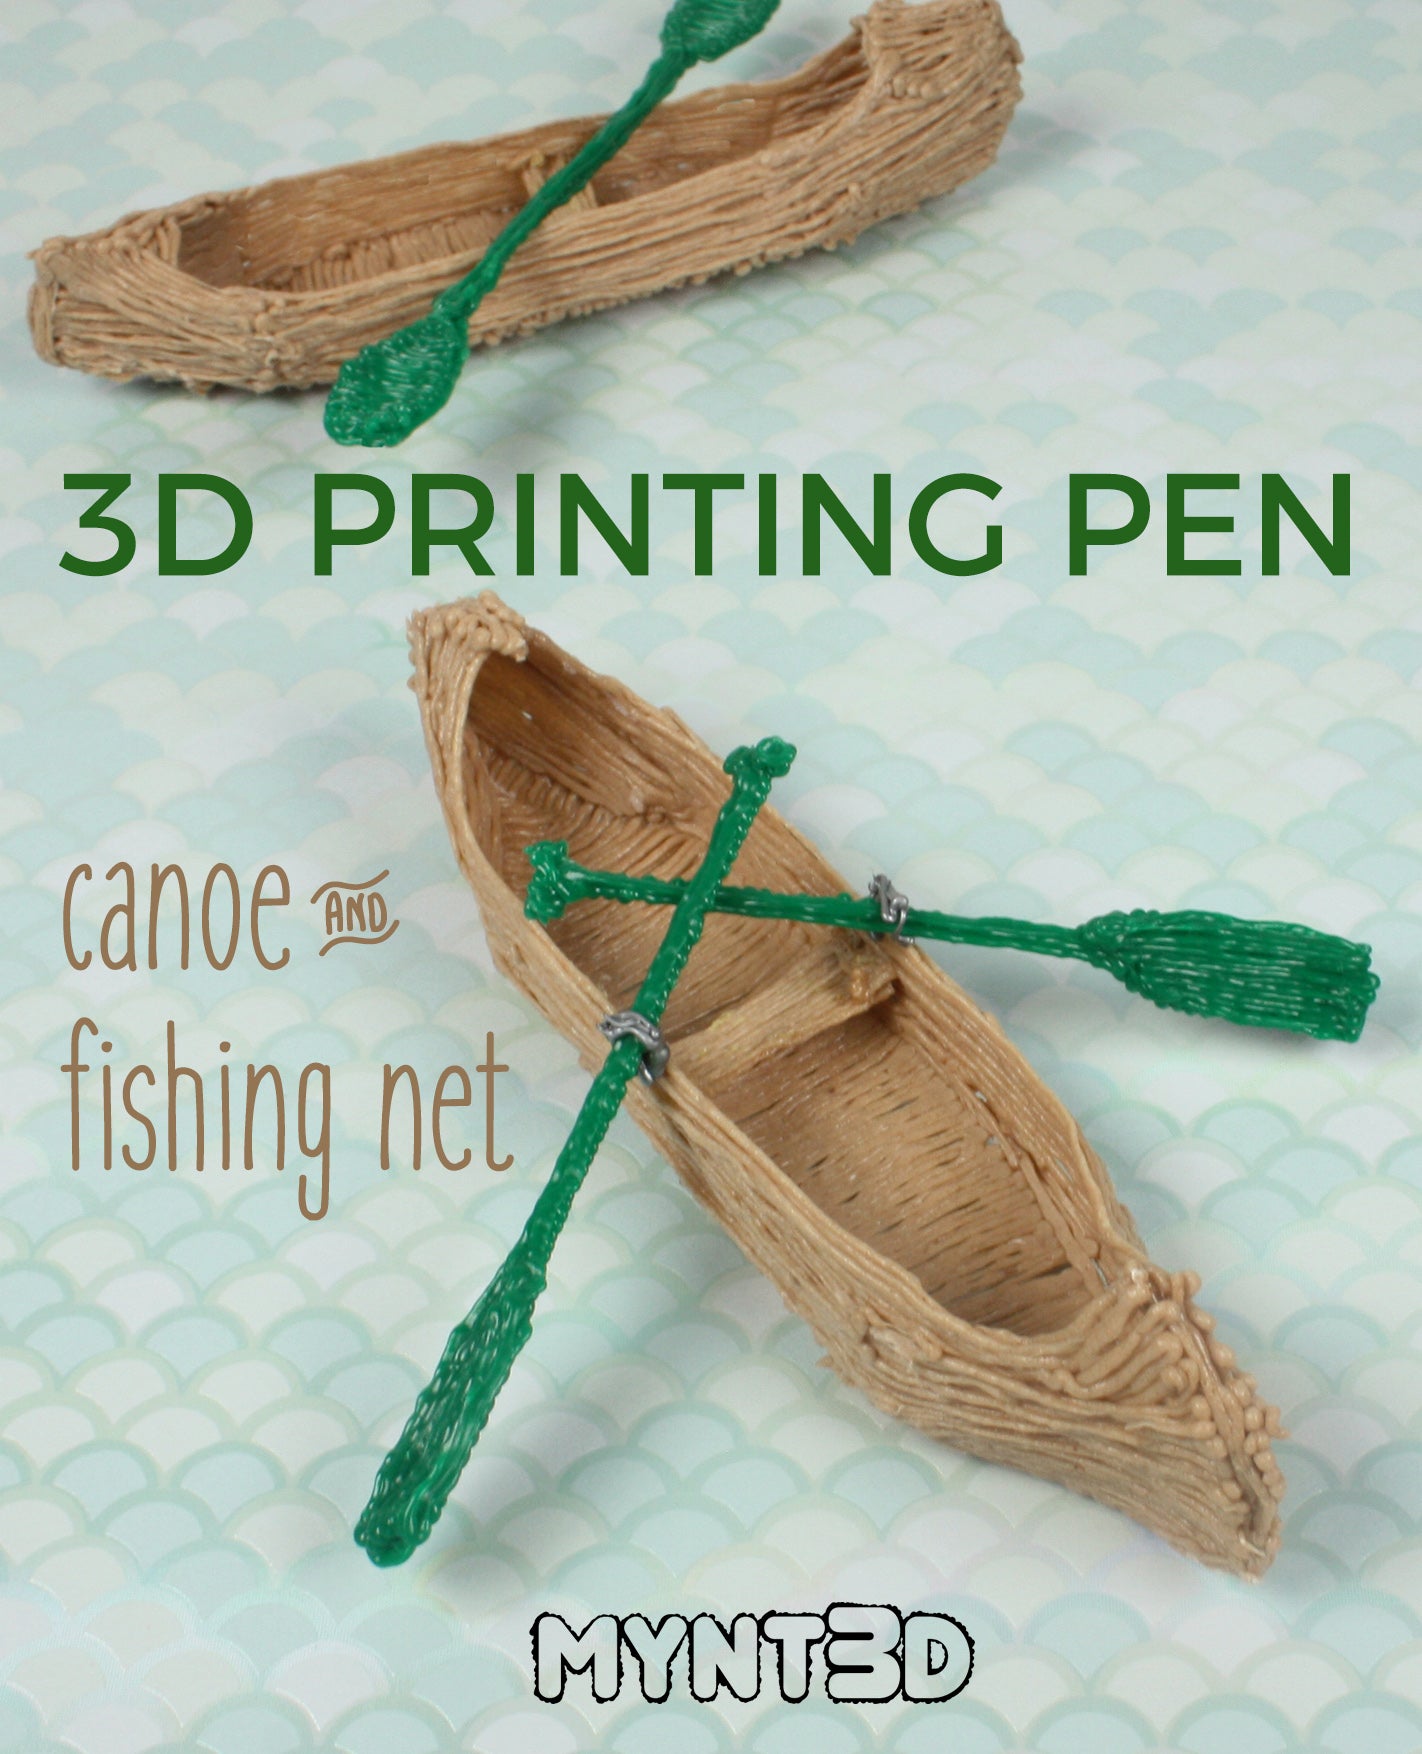 Fishing Canoe 3D Printing Pen Projects